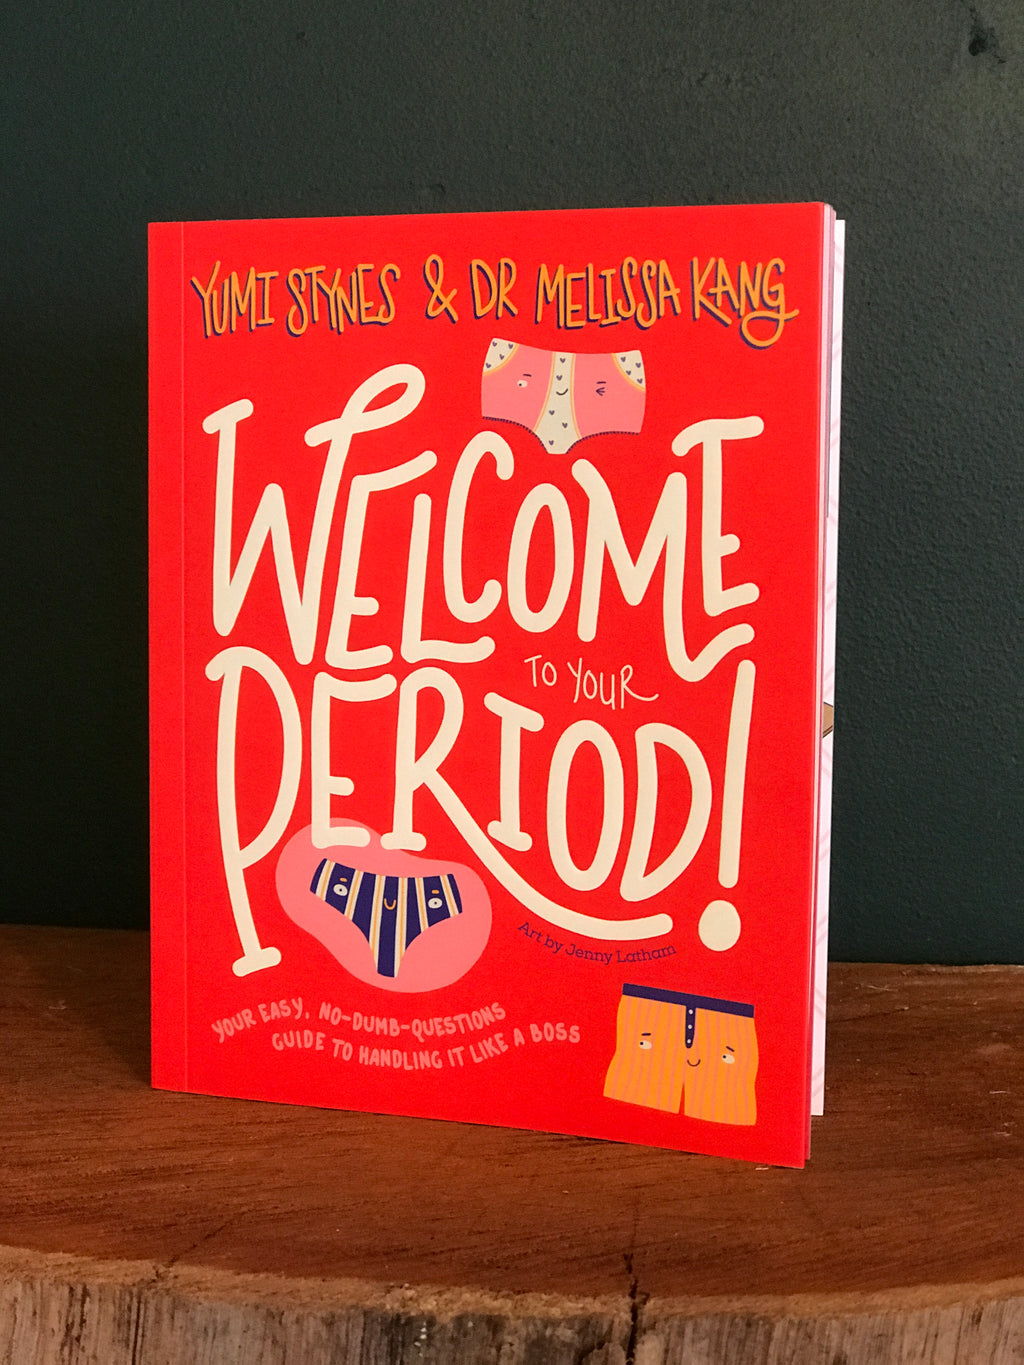 Welcome to Your Period